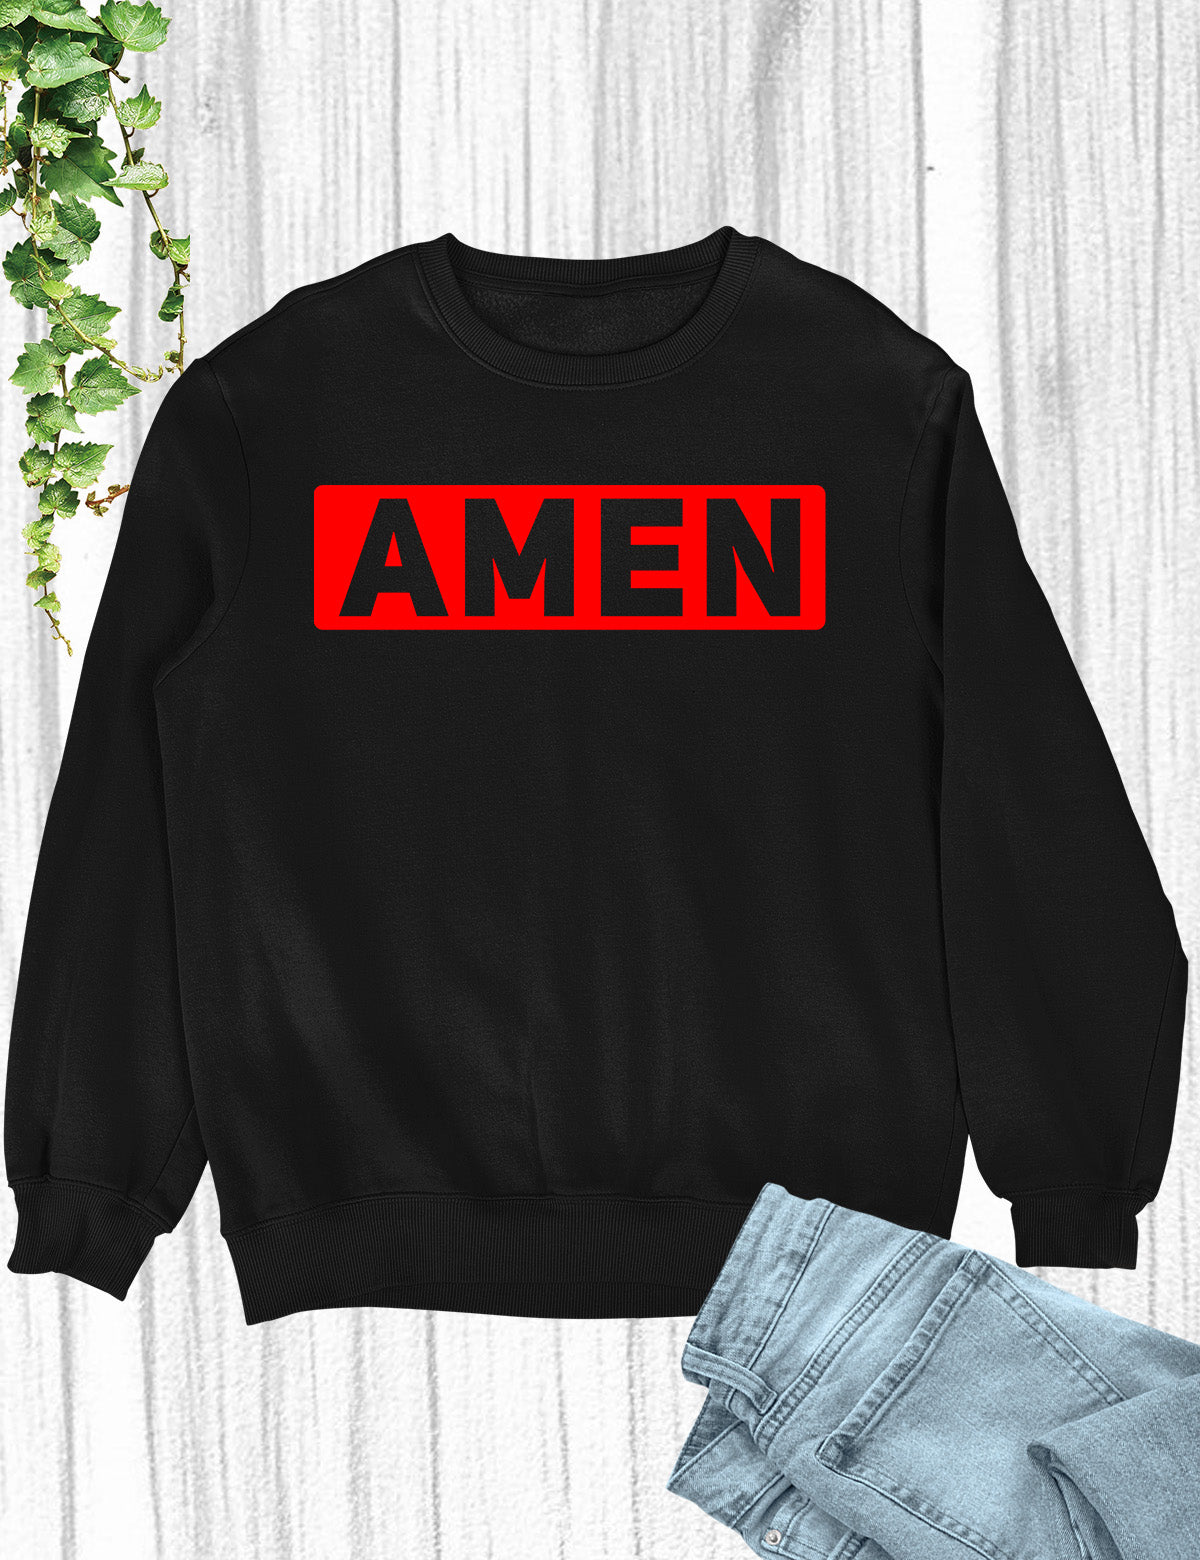 AMEN Religious Sweatshirts Let God's will Be Done